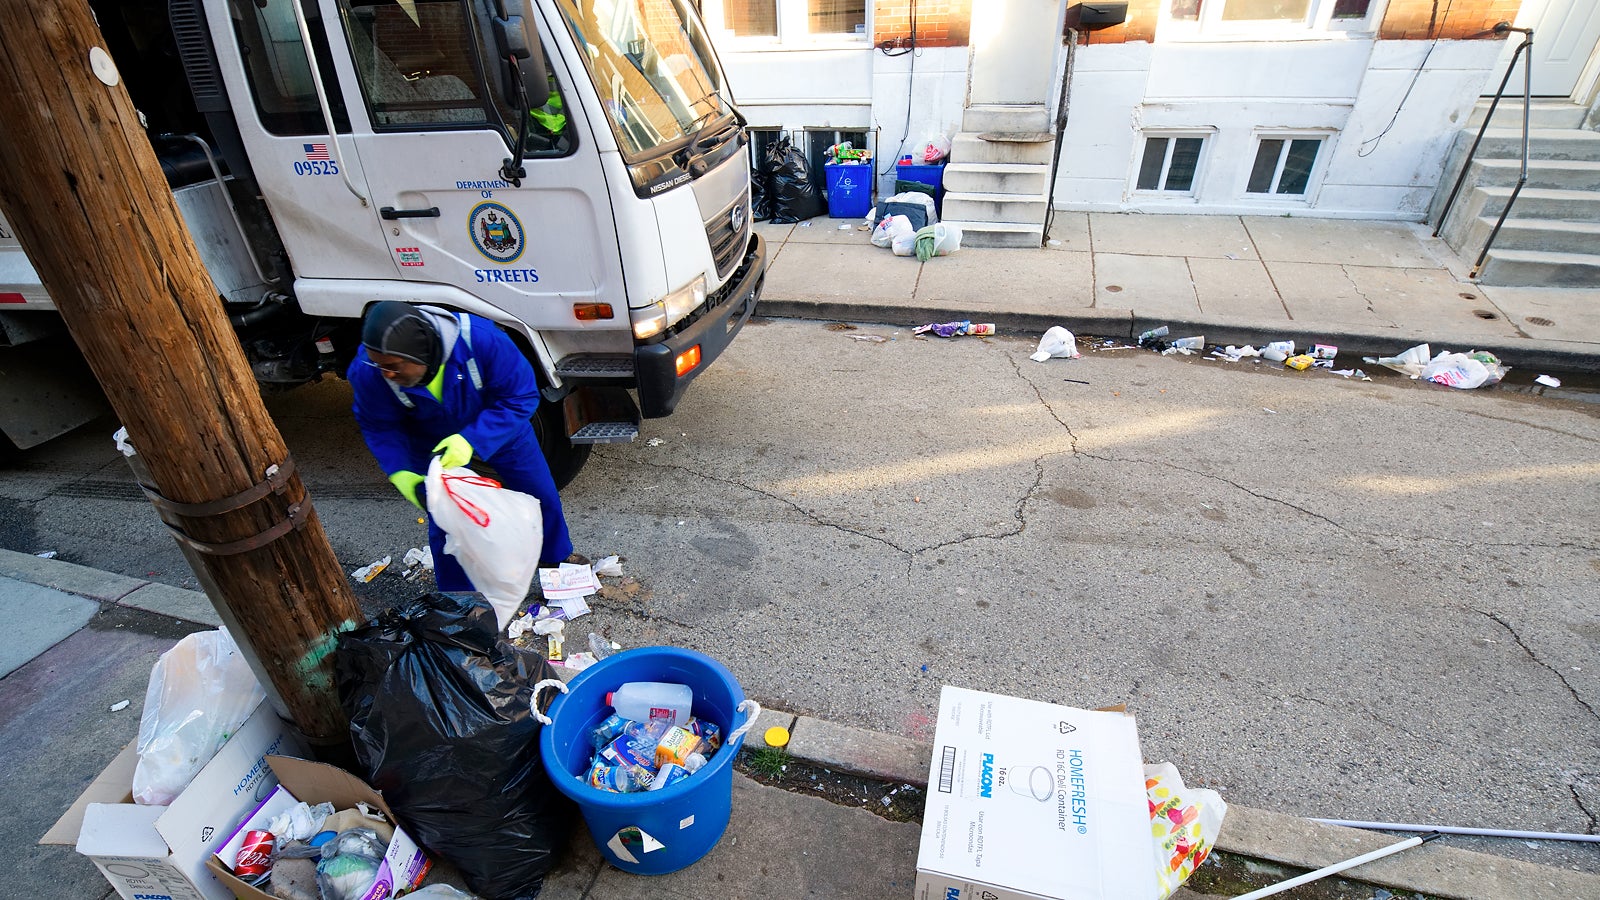 High winds have picked up some of the rubbish and recyclables and blew it into the street. South Philadelphia, PA, on February 13th, 2017. (Bastiaan Slabbers for NewsWorks)